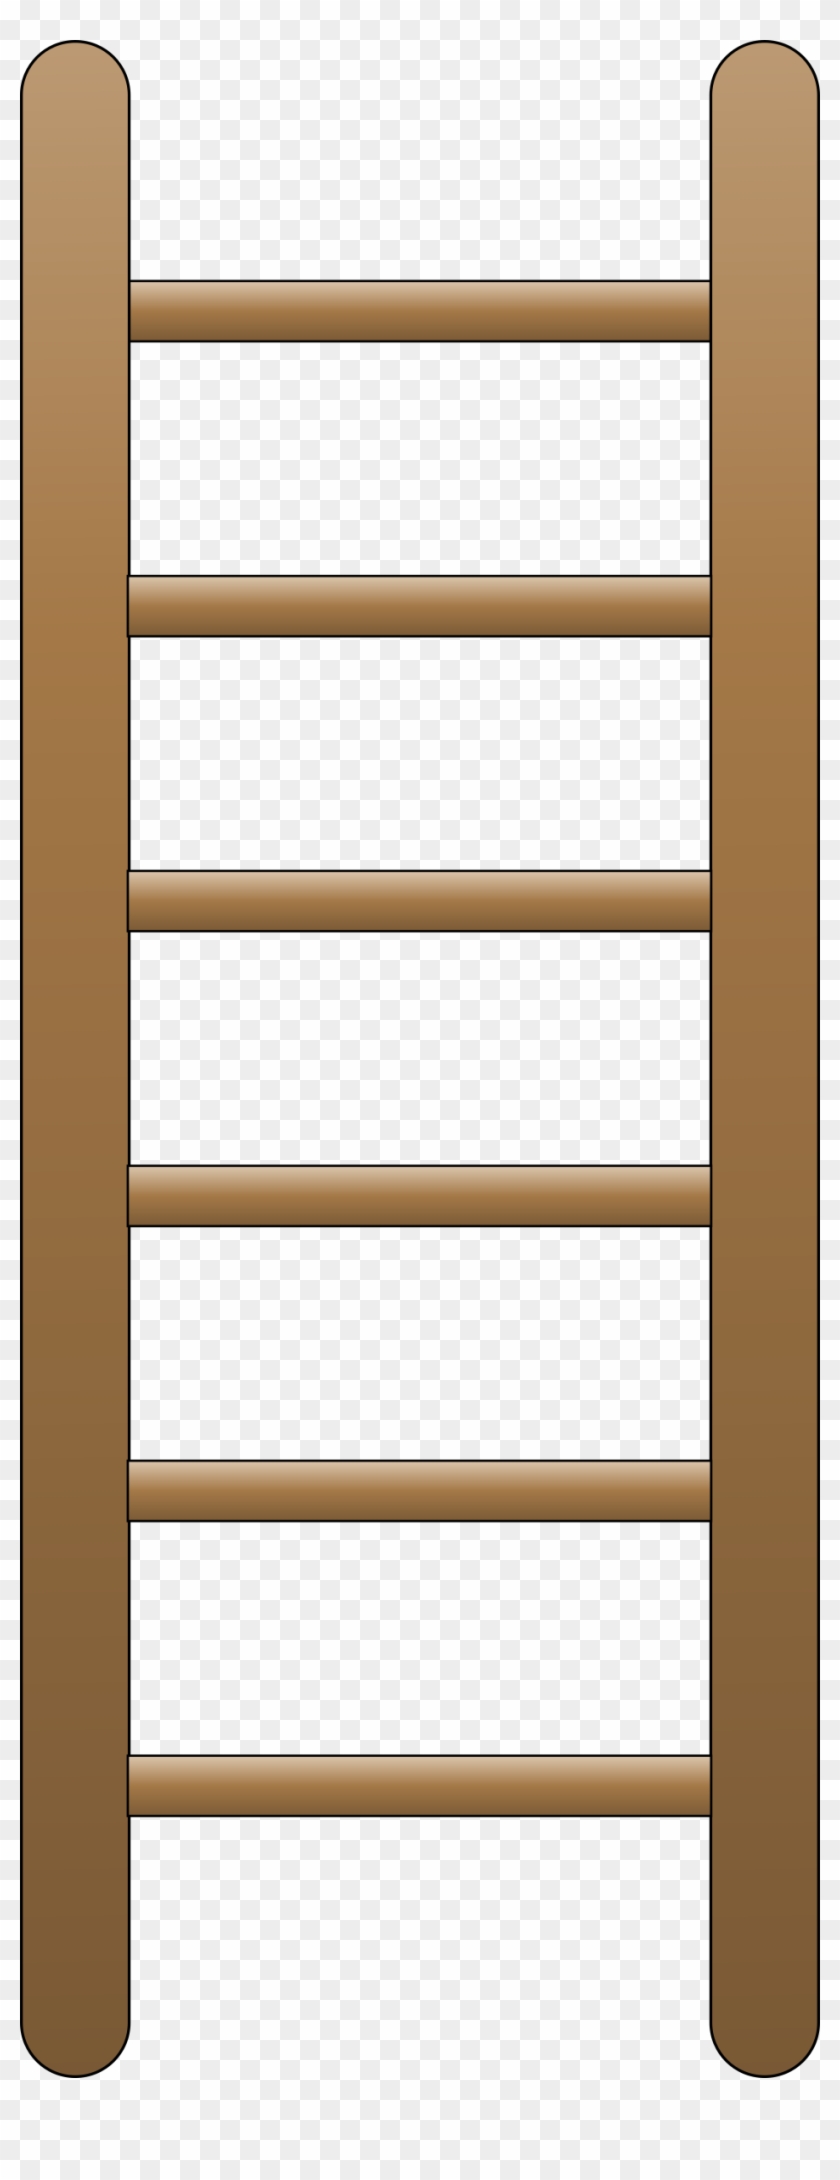 Clip Royalty Free Download Ladder Vector Flat - Wood - Png Download #469681